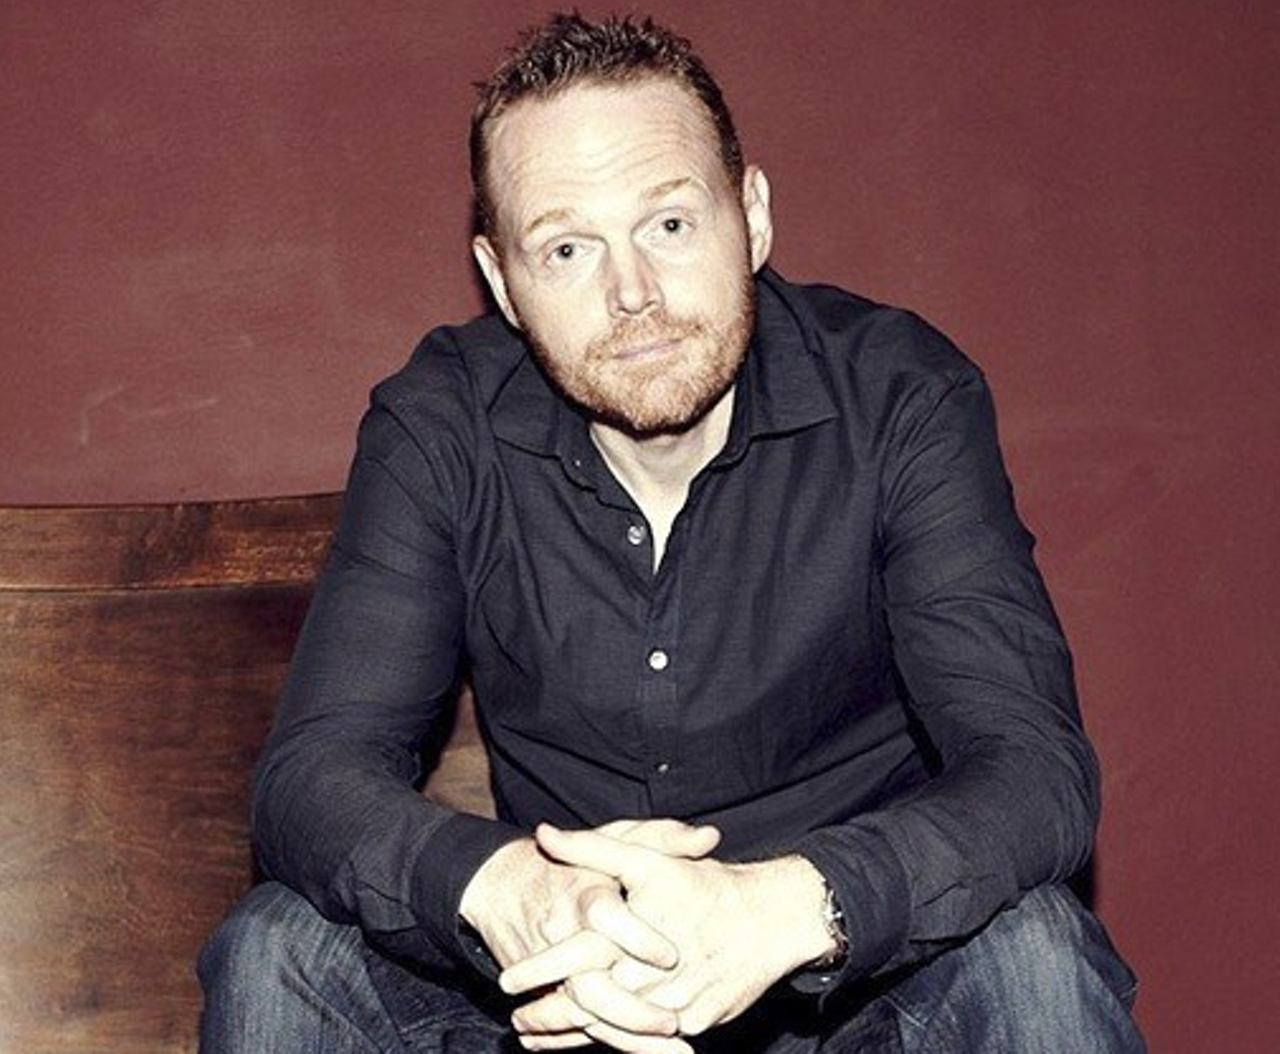 Friday, October 23: Bill Burr - Bill Burr is coming to Cleveland on October 23, 2015 to play two shows at the State Theater. Famous for having roles on TV shows Breaking Bad and making appearances on David Letterman, Conan O'Brien and Jimmy Fallon. comedian Bill Burr is back on the road after time off to work on a new animated series for Netflix. "I get recognized a little more than usual but I'm still a background guy," says Burr. "I think it's good to be the seventh or eighth character in a movie. Like where I'm at. When people come up to talk to me, I'm still flattered. I'm at that level. Nothing that I saw is going to change anything. It's not like I'm writing legislation. " He performs tonight at 7 and 9:30 p.m. at the State Theatre. Tickets are $47.50. (Niesel, courtesy photo)